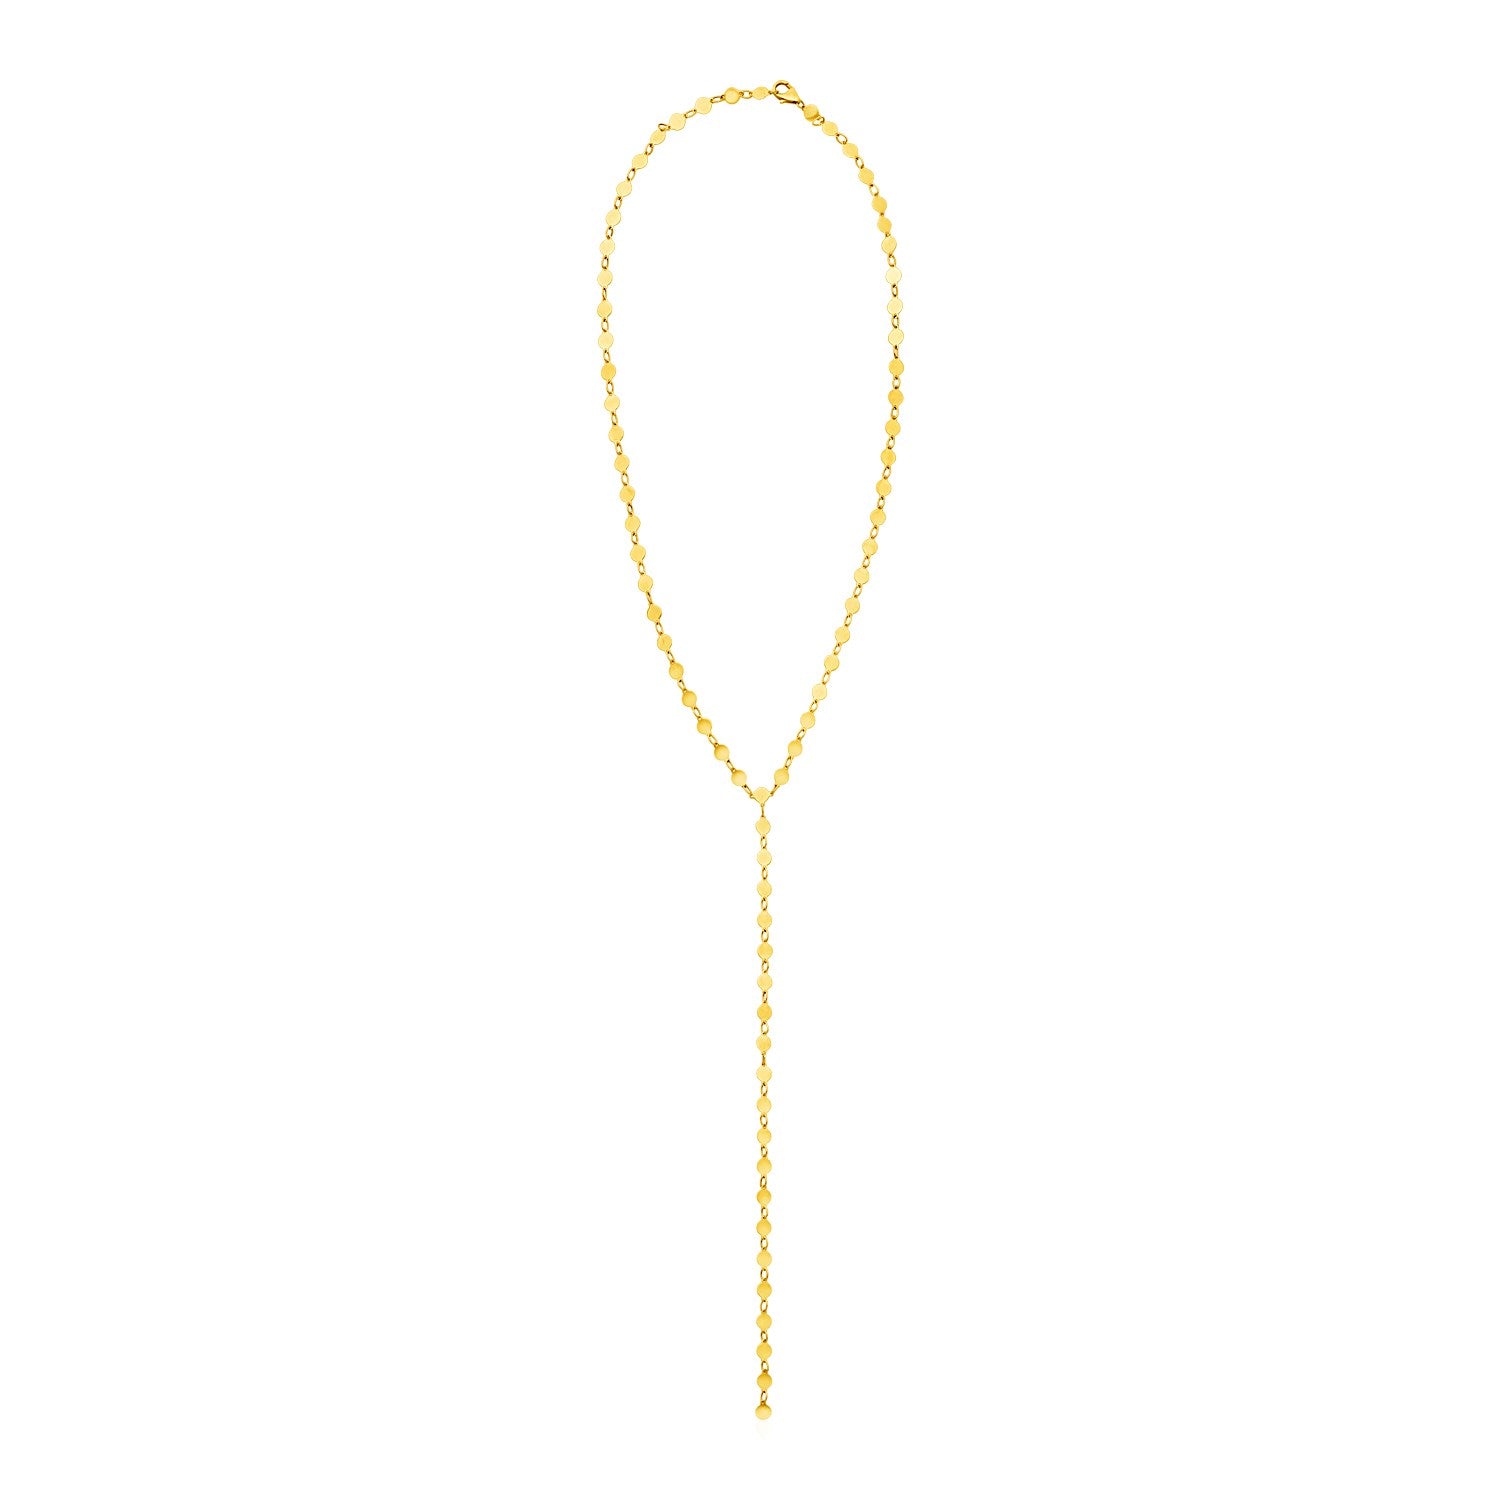 14k Yellow Gold 17 inch Lariat Necklace with Polished Circles